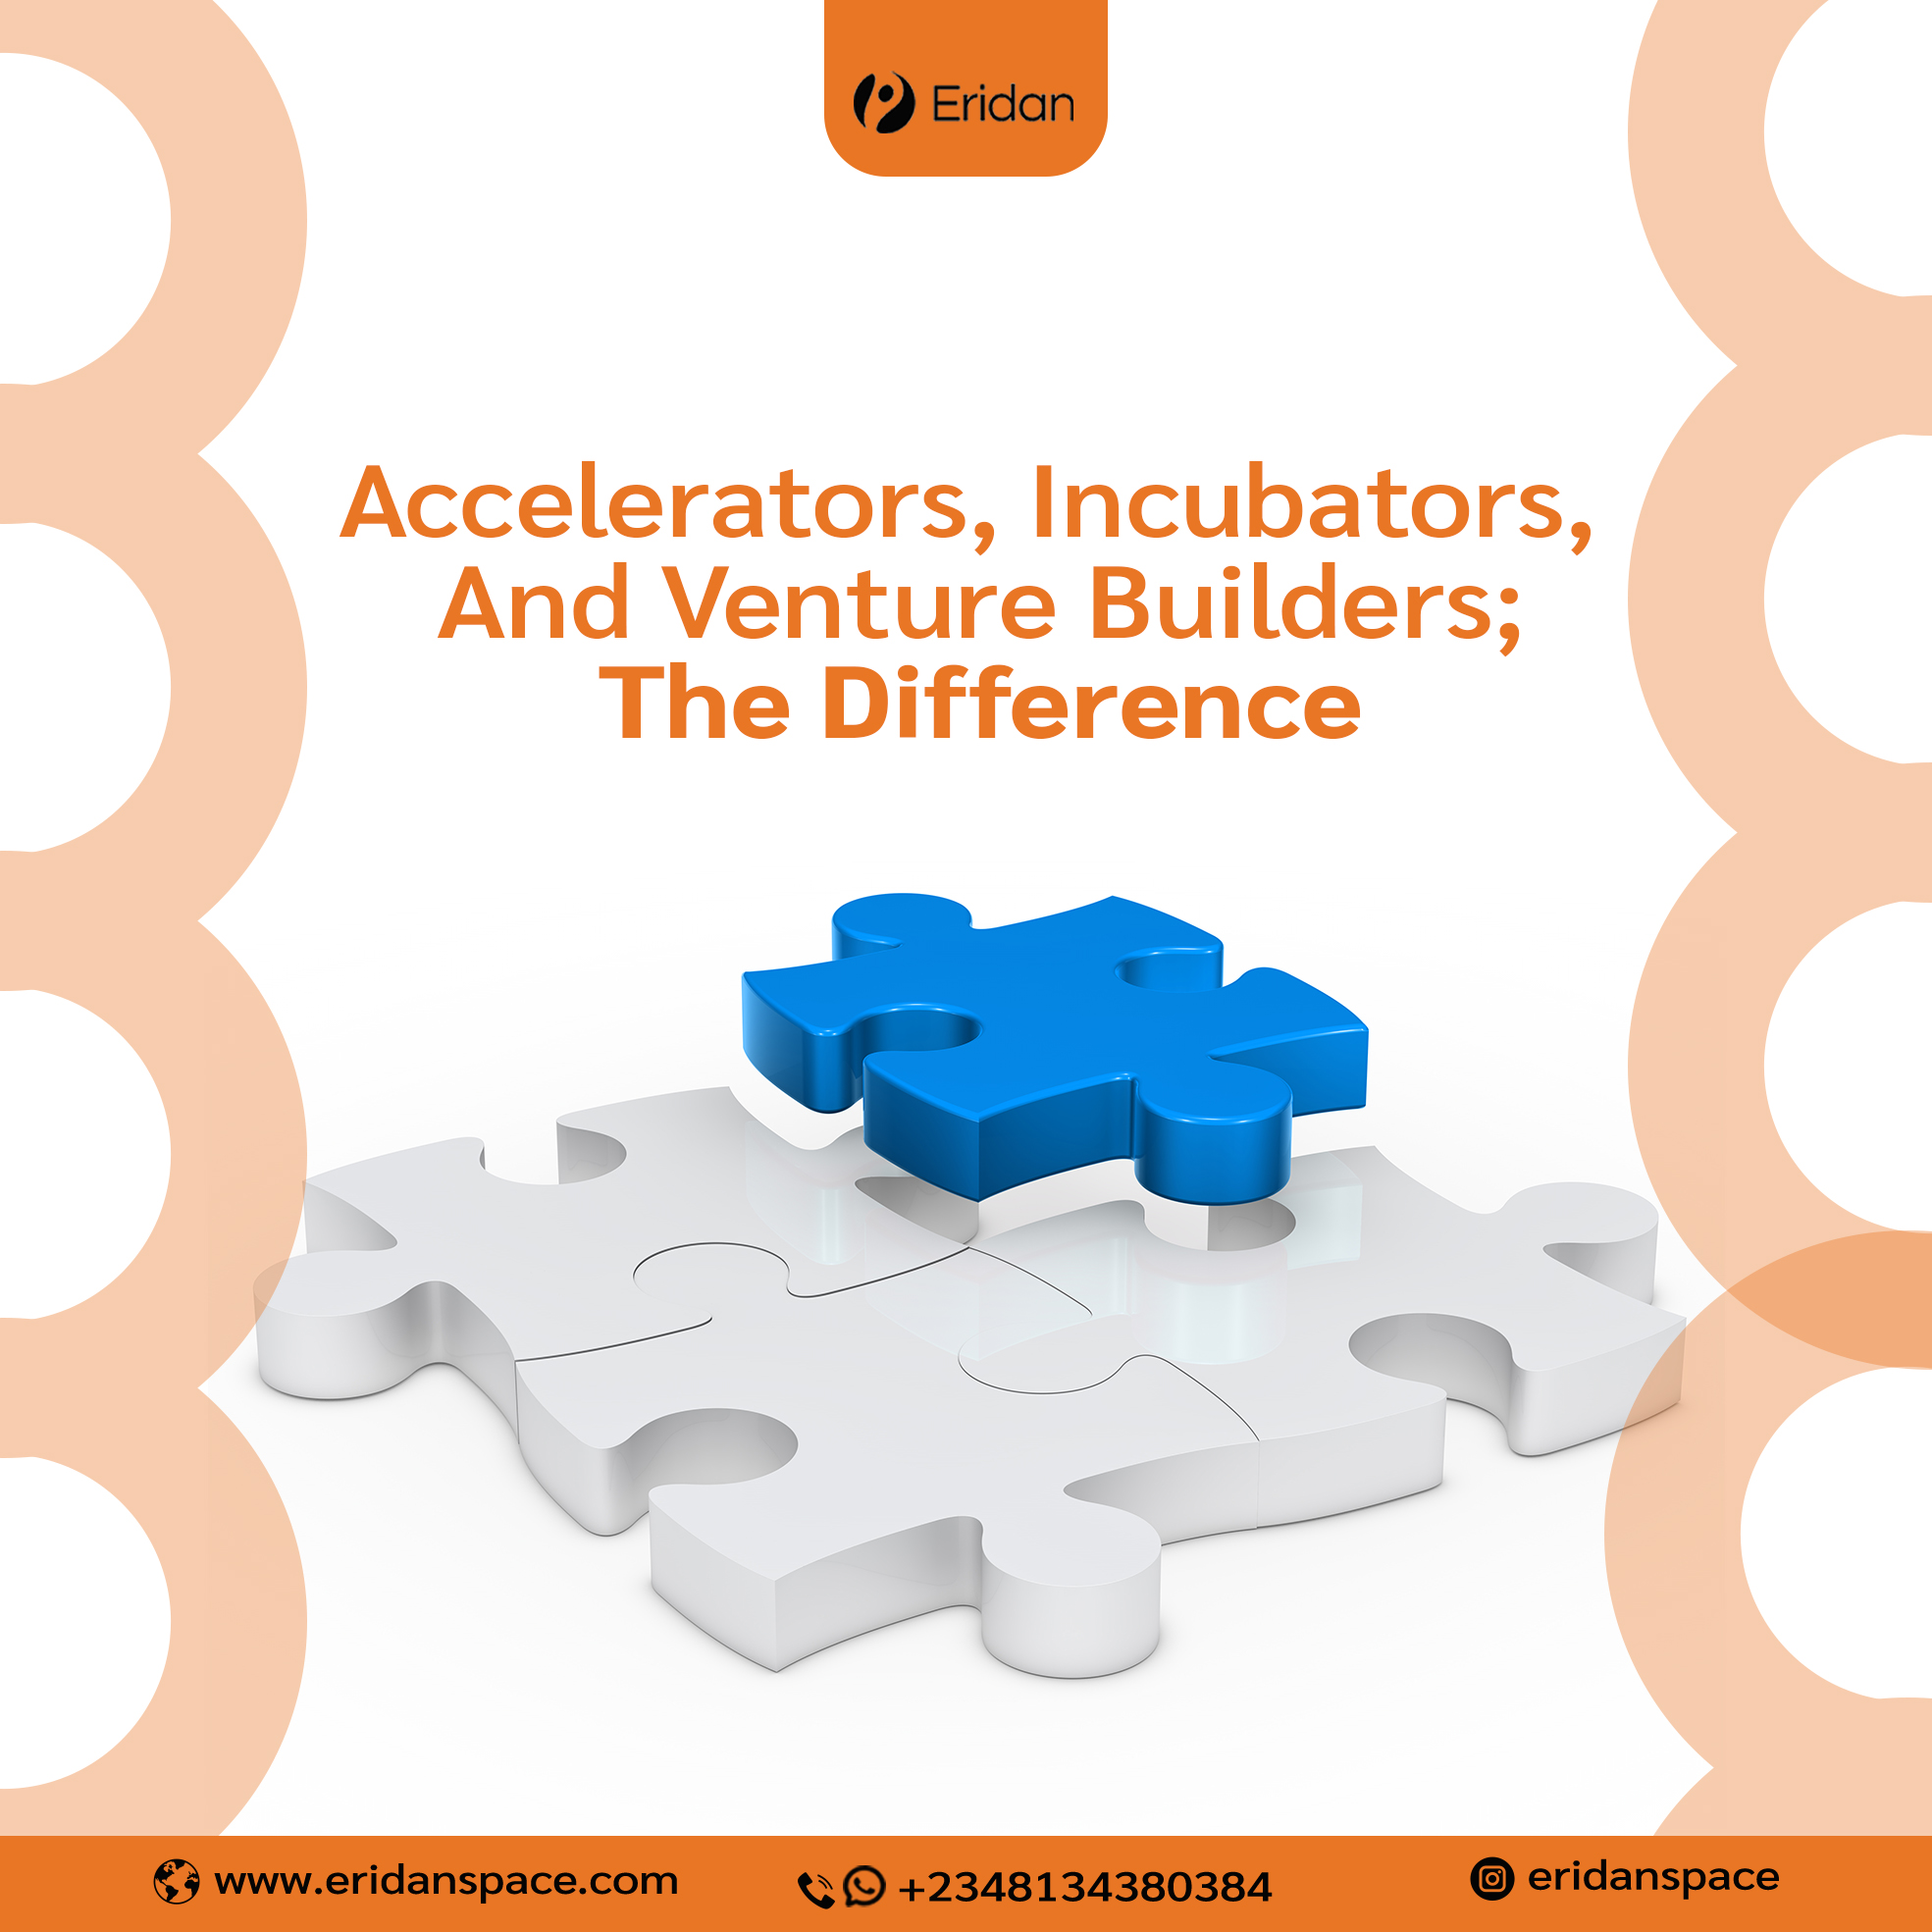 Accelerators, Incubators and Venture builders: The difference